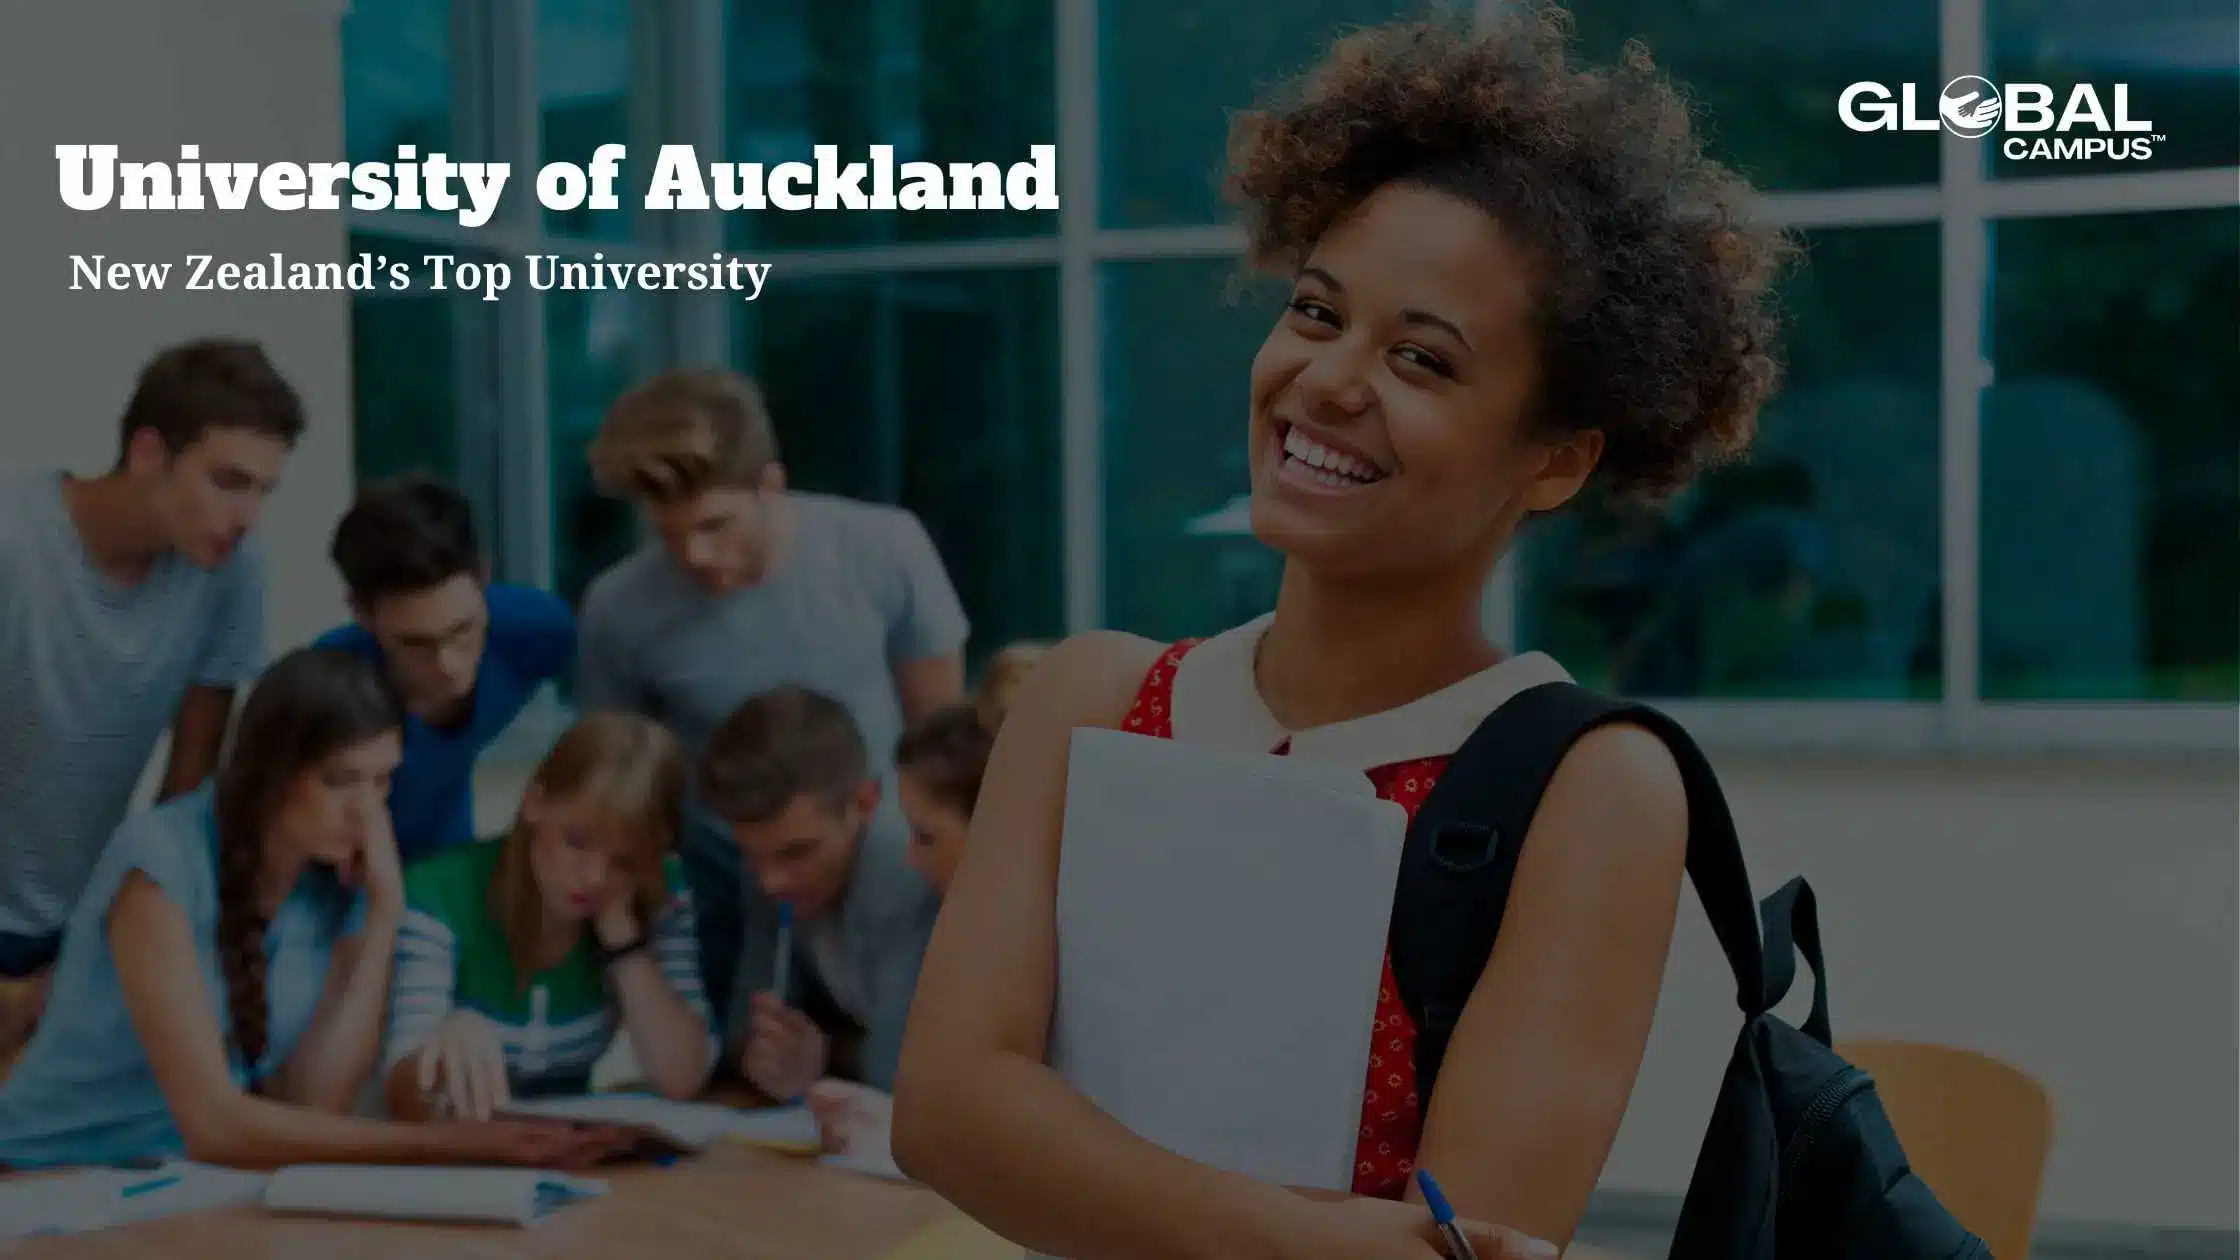 A girl studying at the University of Auckland and is proud of being a student at New Zealand's Top University.